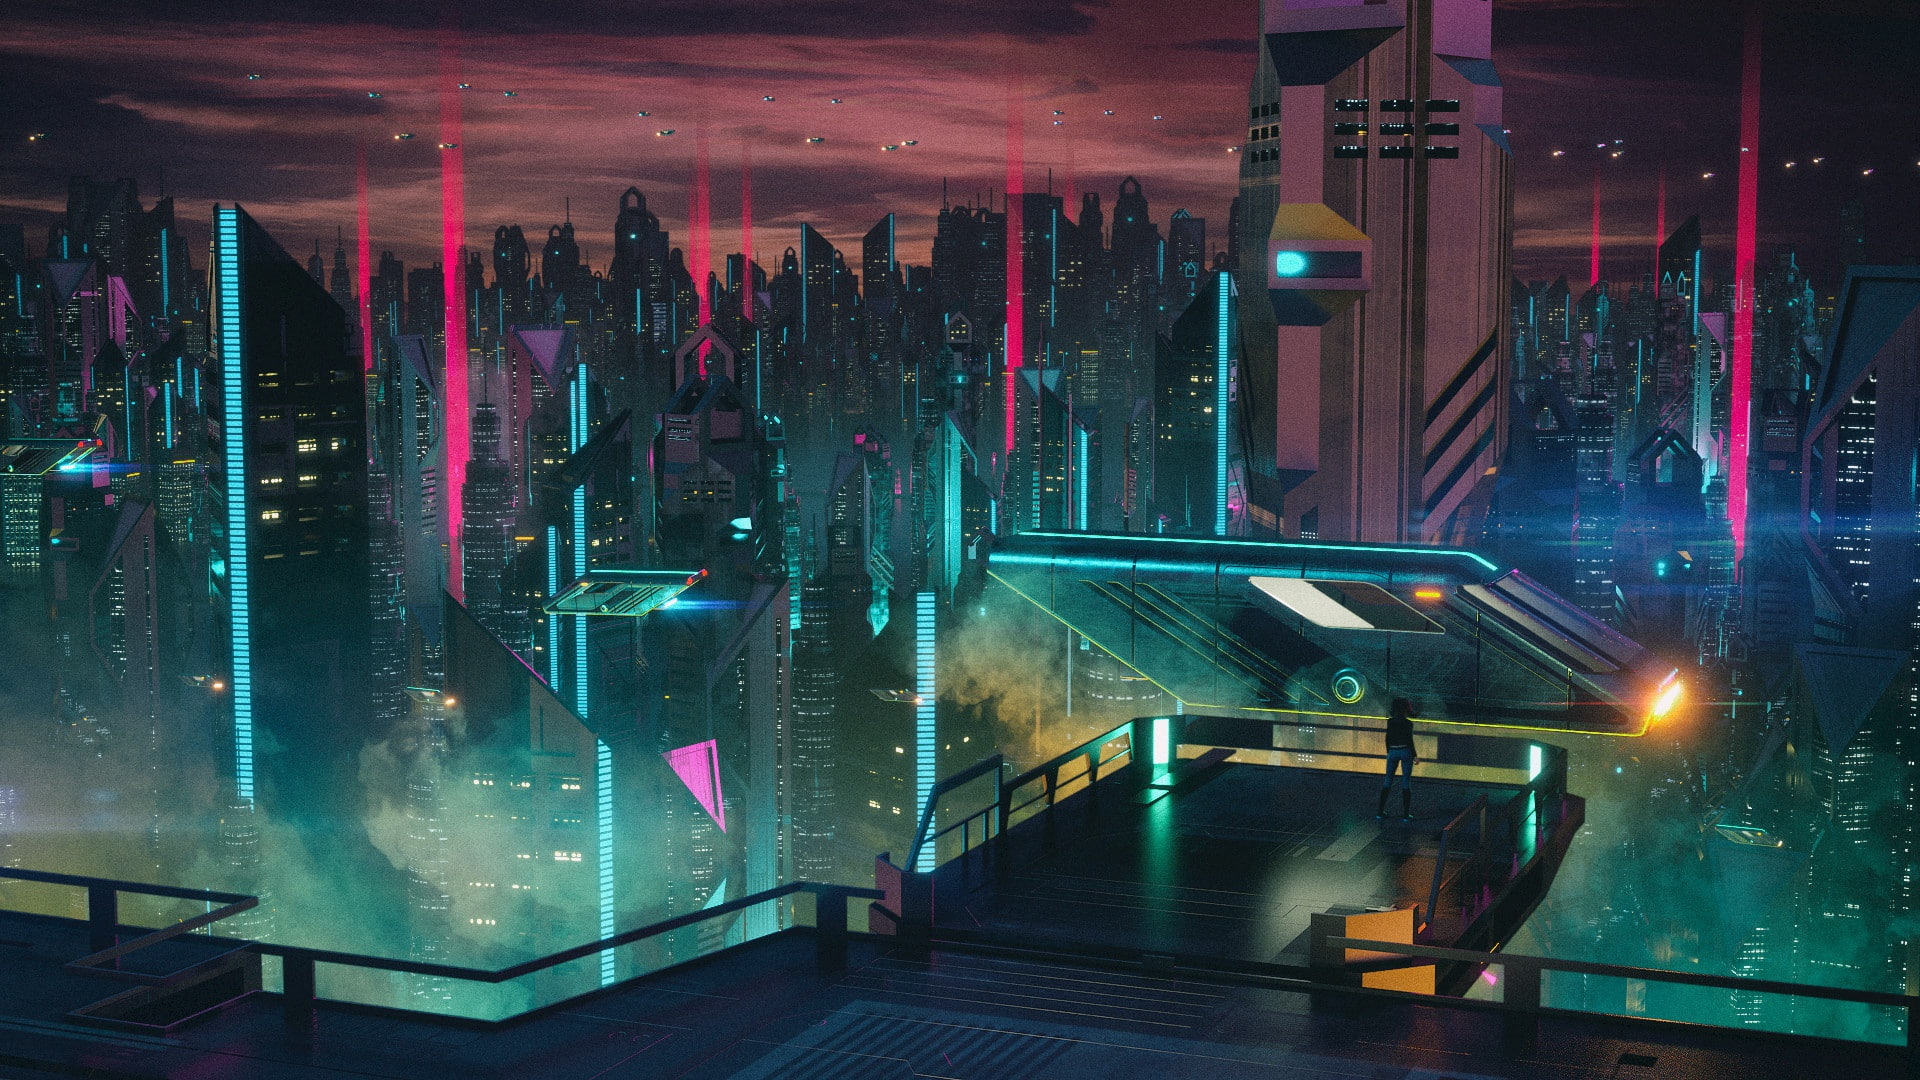 Music, The city, Skyscrapers, Fiction, Cyber, Cyberpunk, Synth